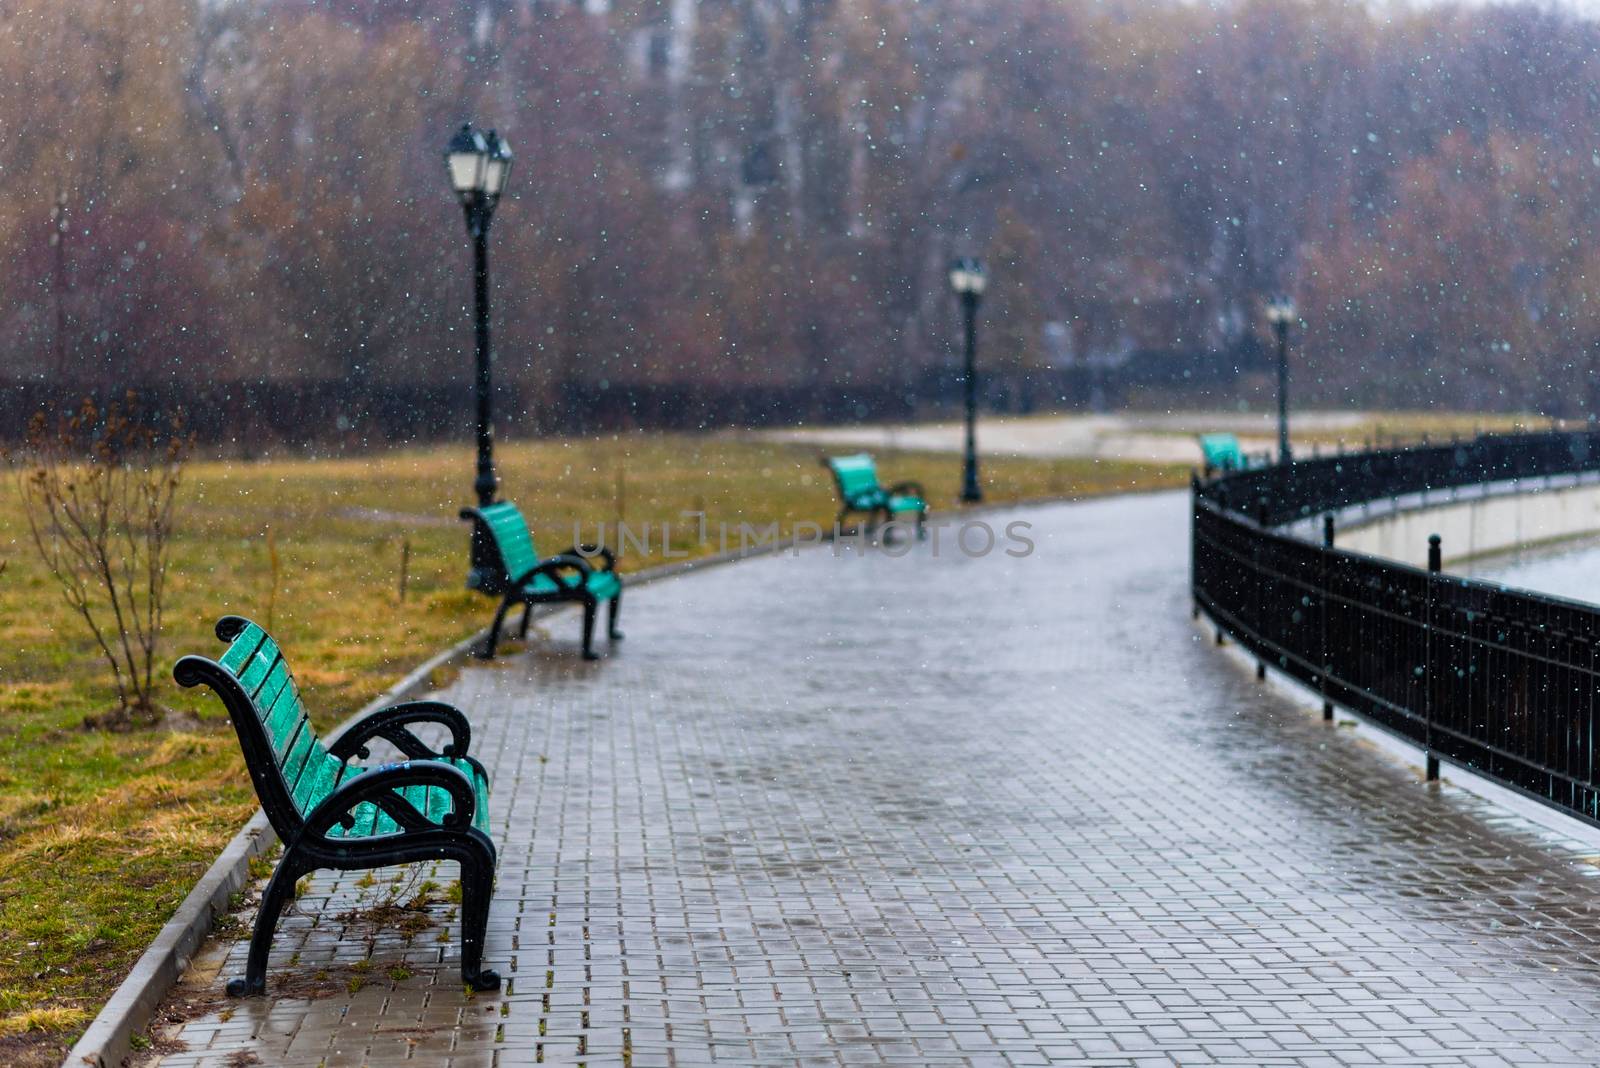 An alley on the bank of the lake with green benches and street lights under falling snow.